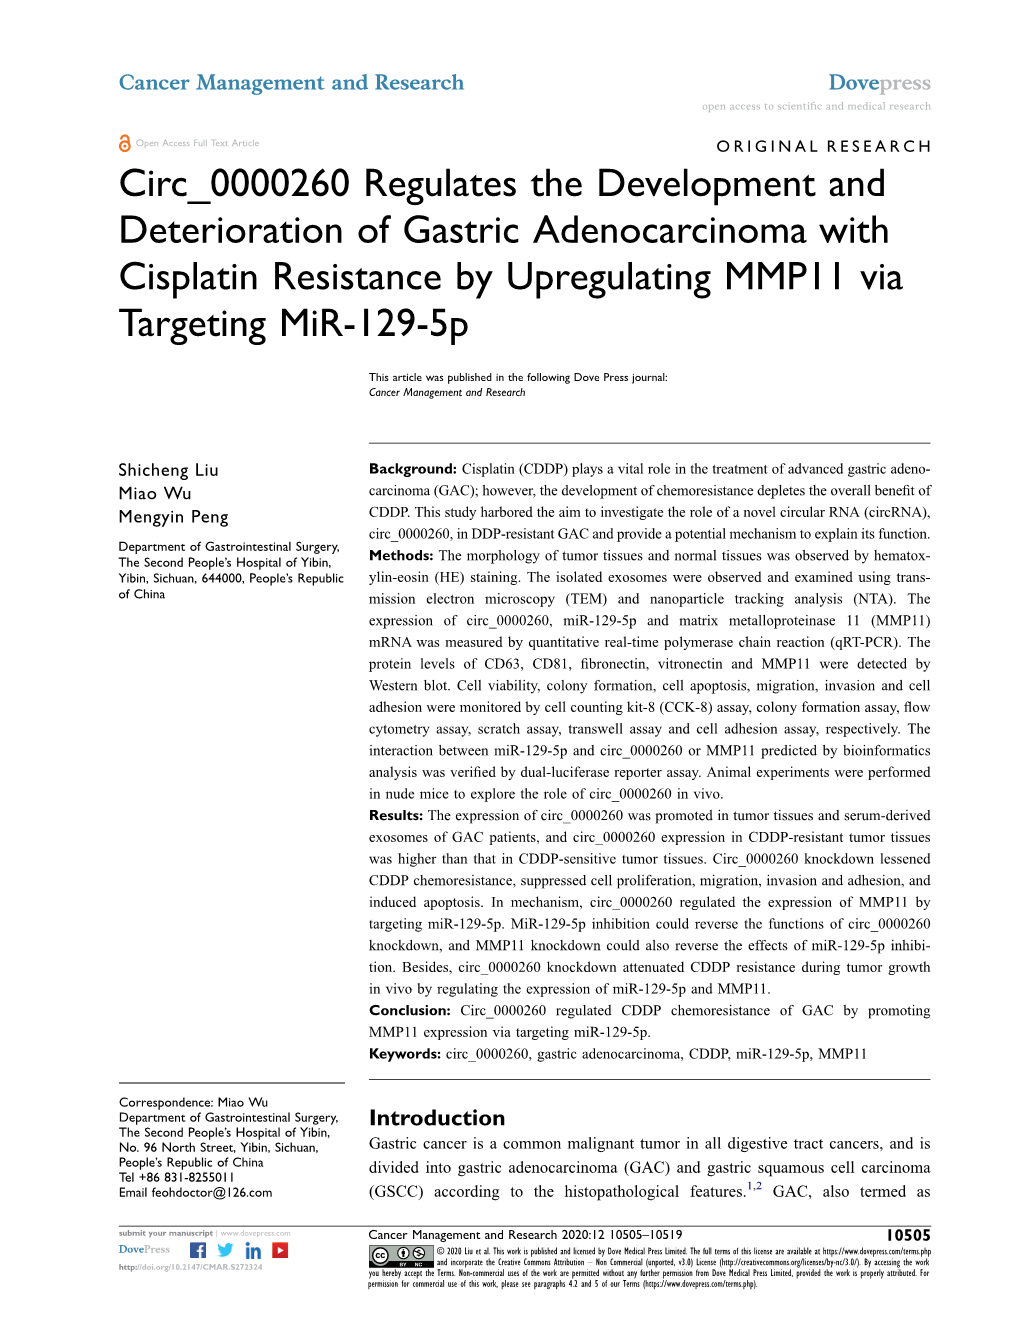 Circ 0000260 Regulates the Development and Deterioration of Gastric Adenocarcinoma with Cisplatin Resistance by Upregulating MMP11 Via Targeting Mir-129-5P